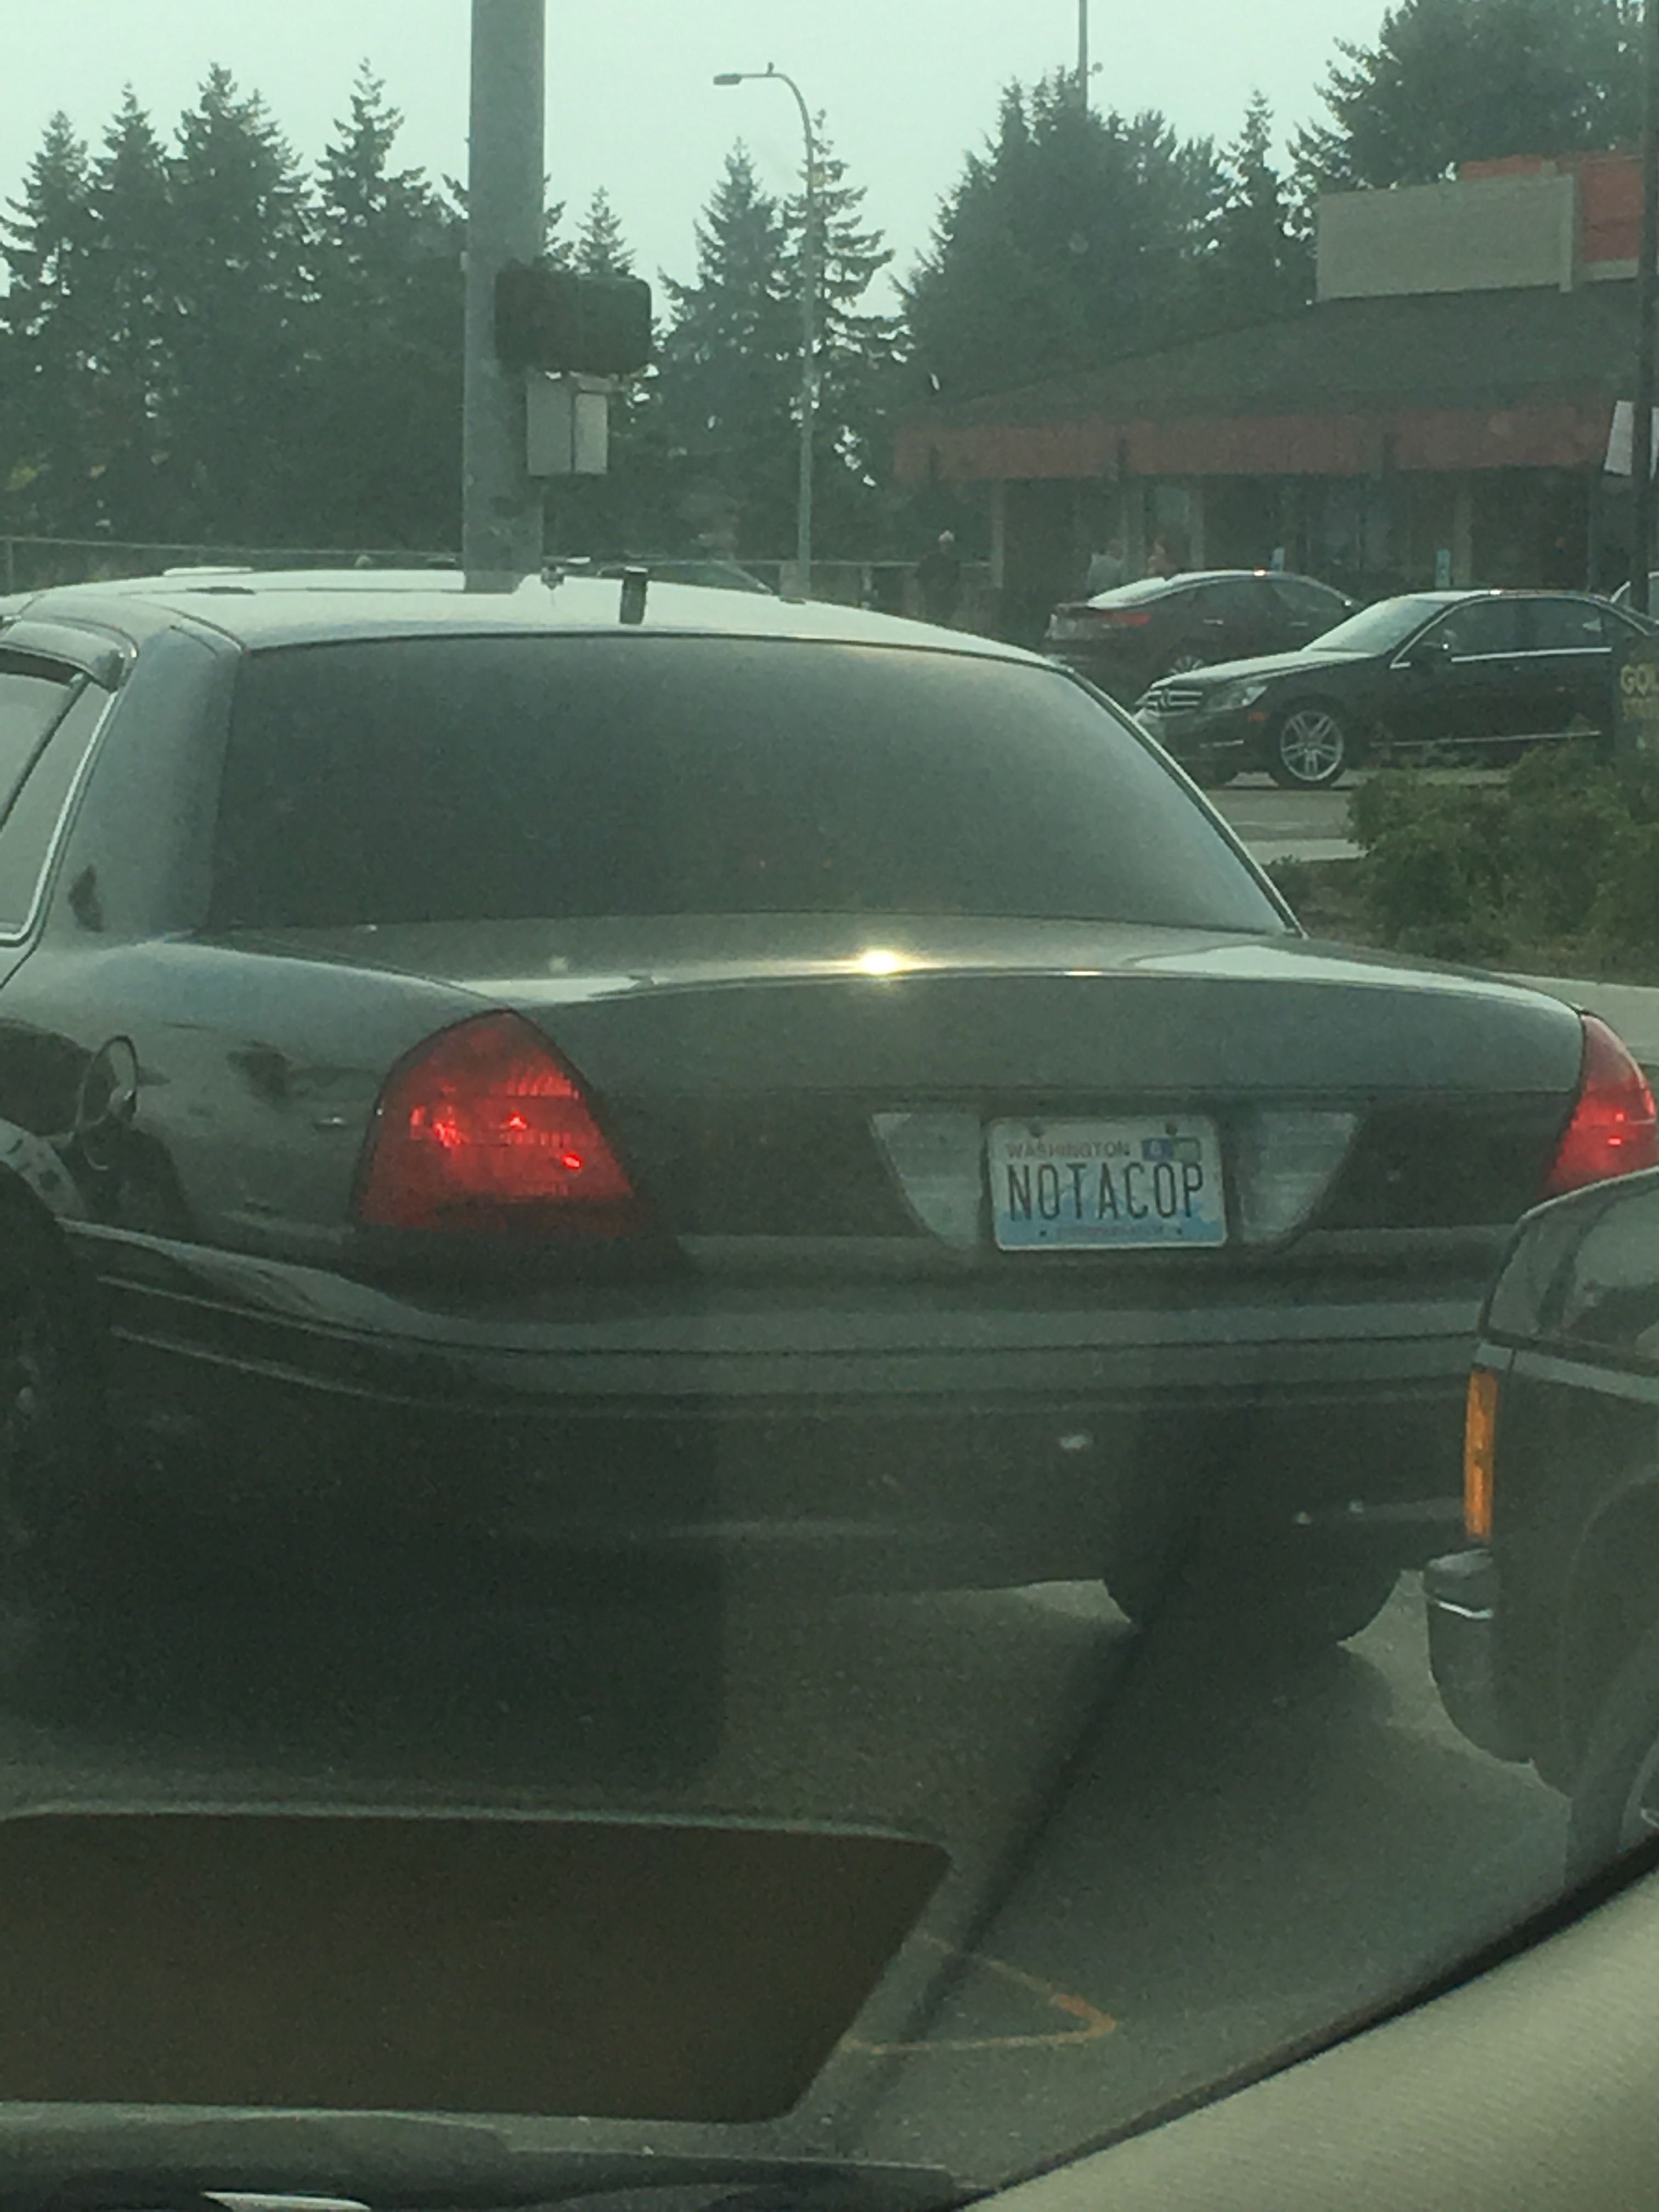 Saw this guy in traffic the other day